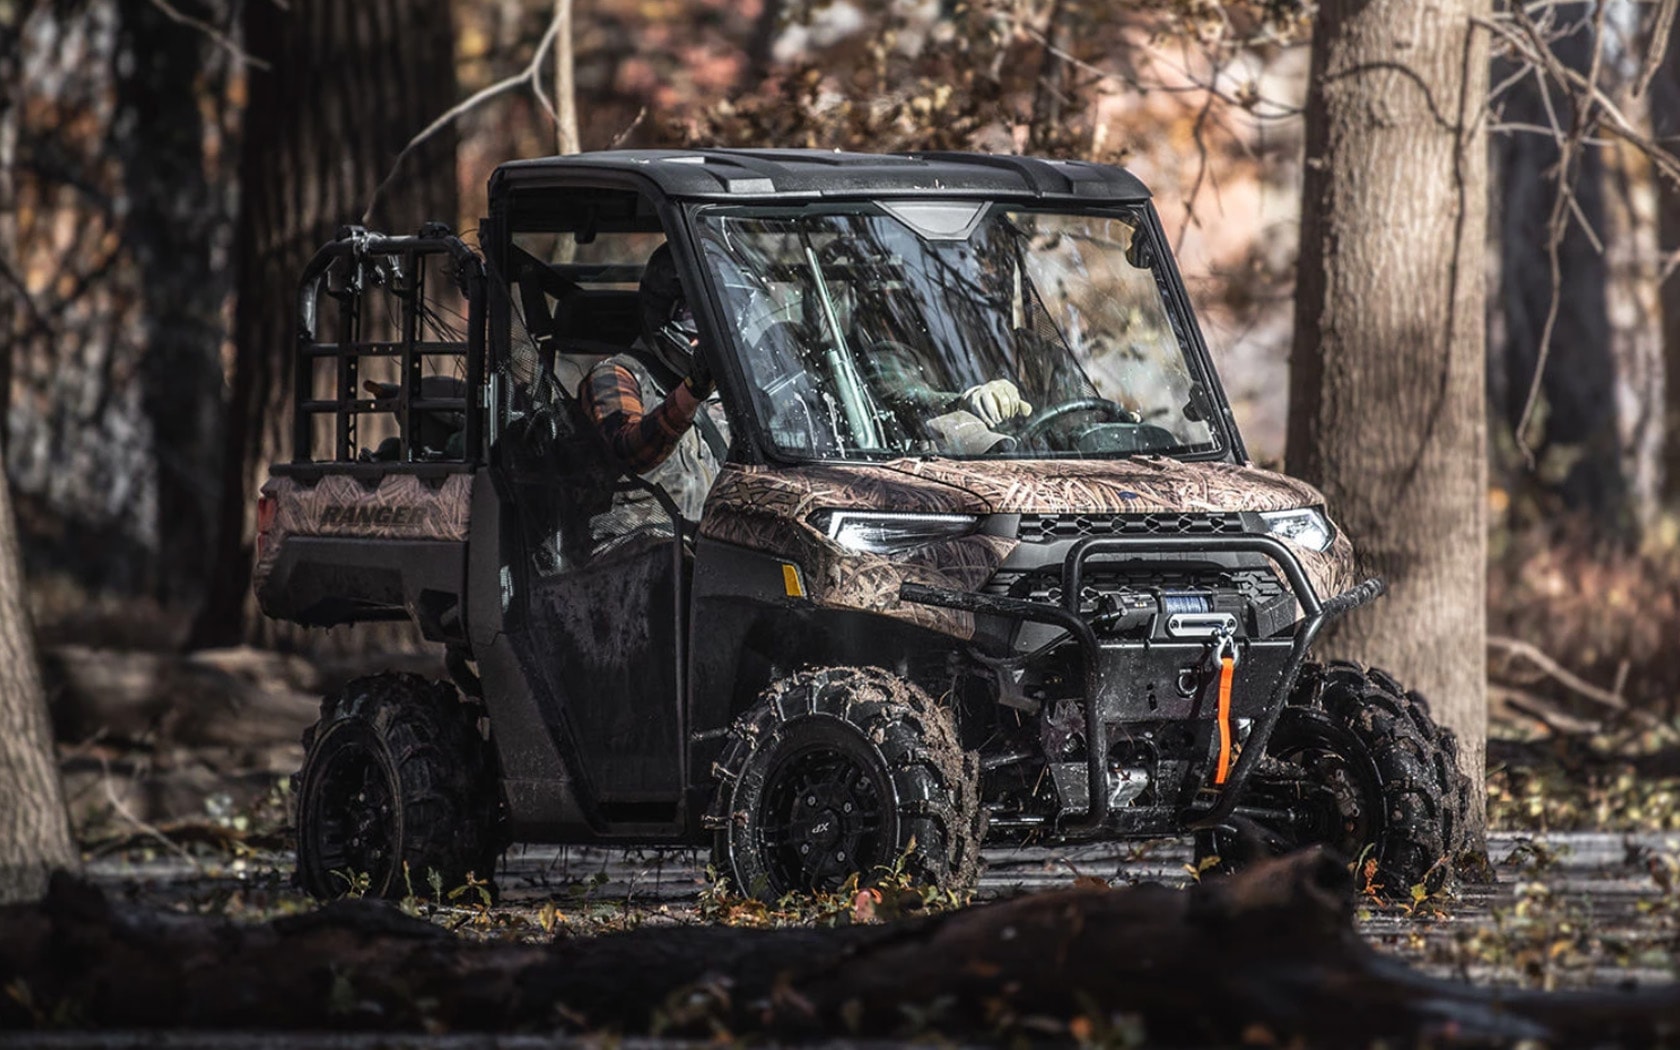 2021 Polaris Sportsman 570 Gets Down on Ohlins Suspension with Special  Edition - autoevolution